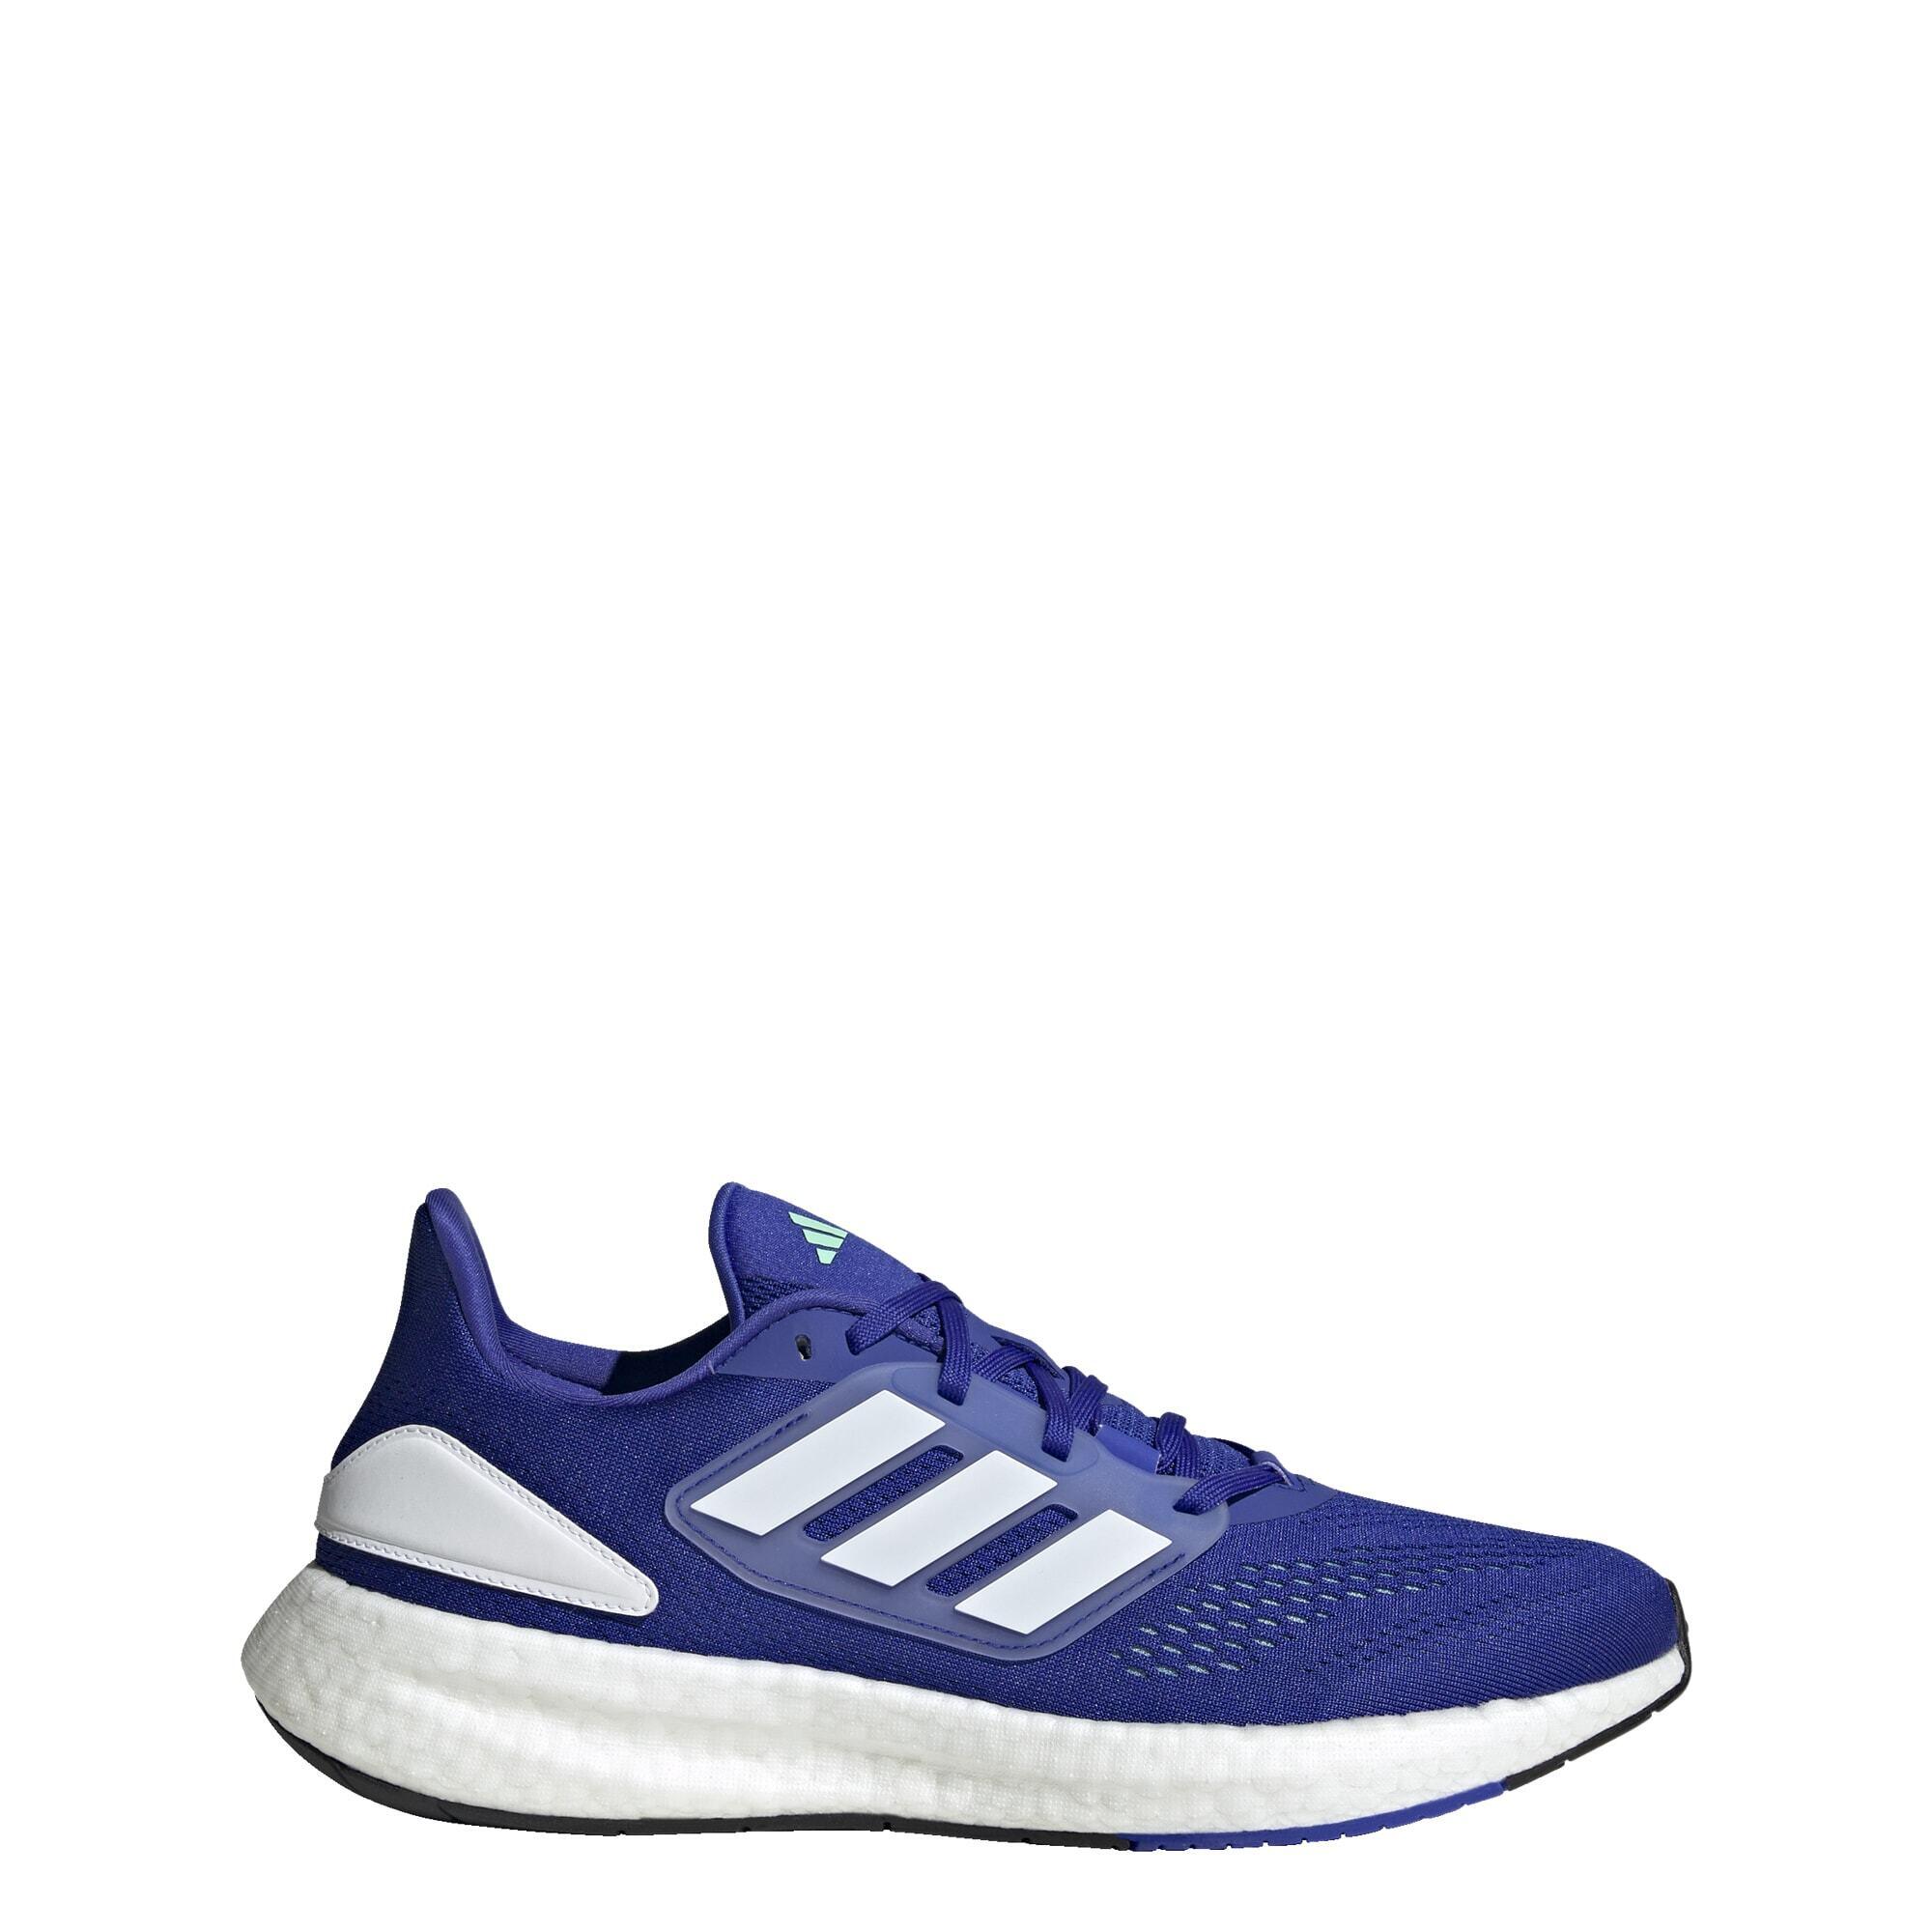 Pureboost 22 Shoes 1/7